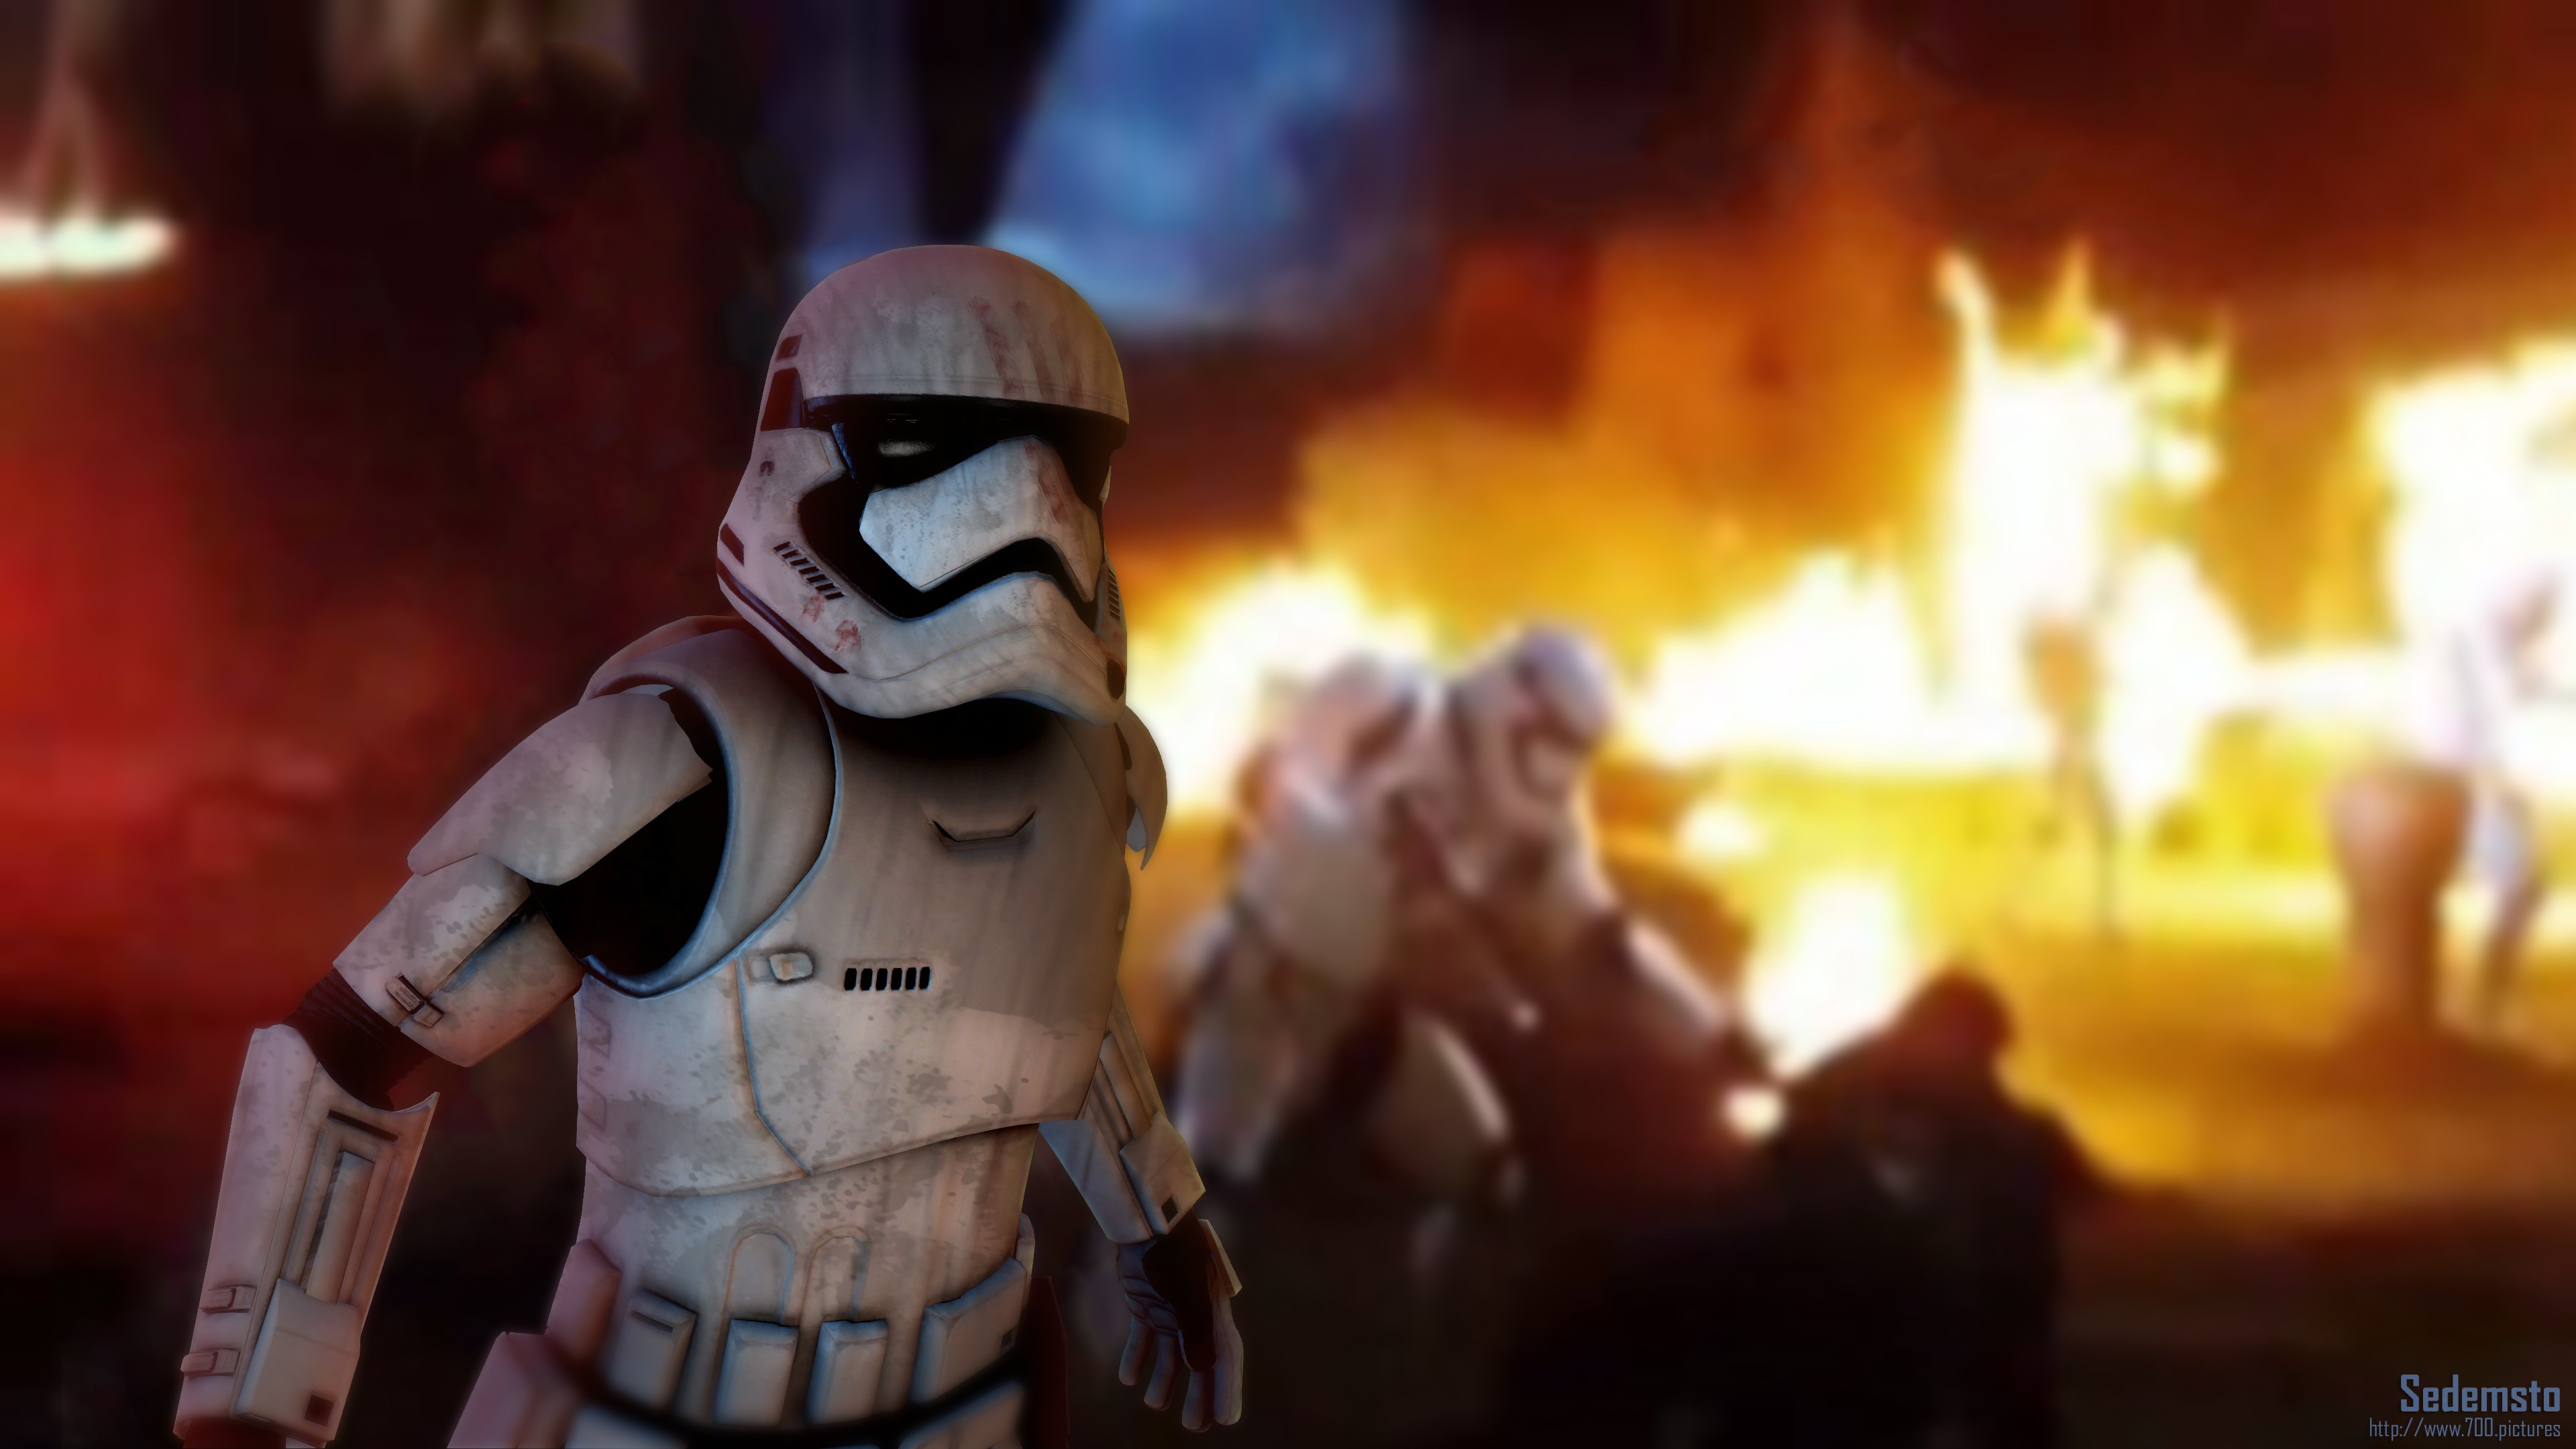 General 3840x2160 Star Wars Star Wars: The Force Awakens fan art movies The First Order First Order Trooper science fiction DeviantArt